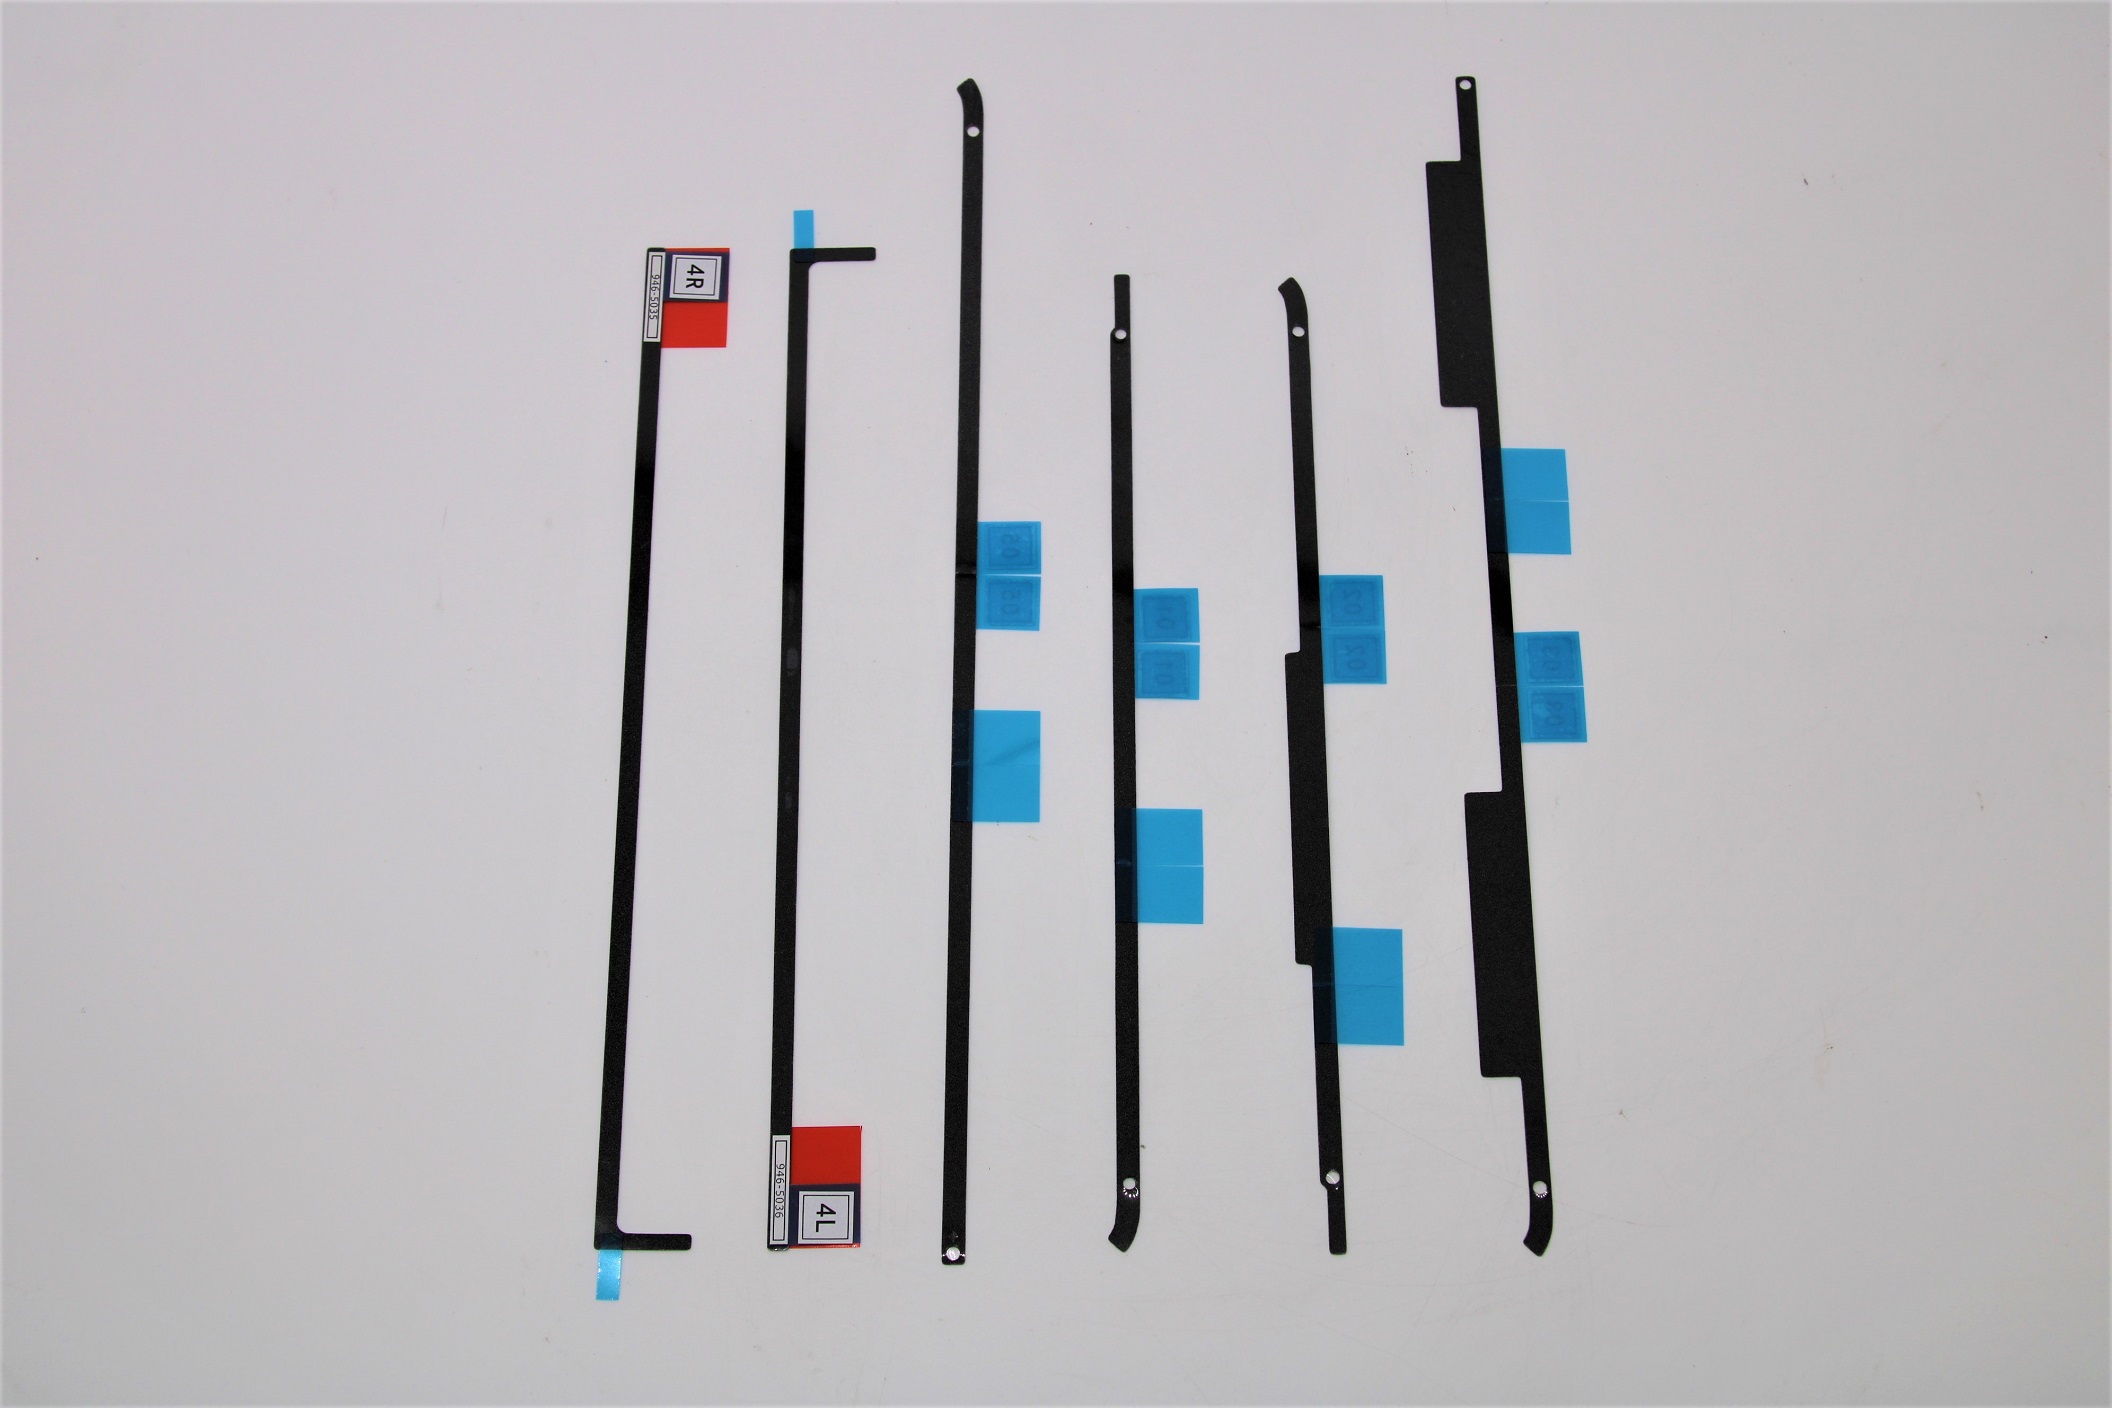 LCD Screen Adhesive Strip Sticker Tape For IMac 21.5" A1418 2012 2013 2014 2015